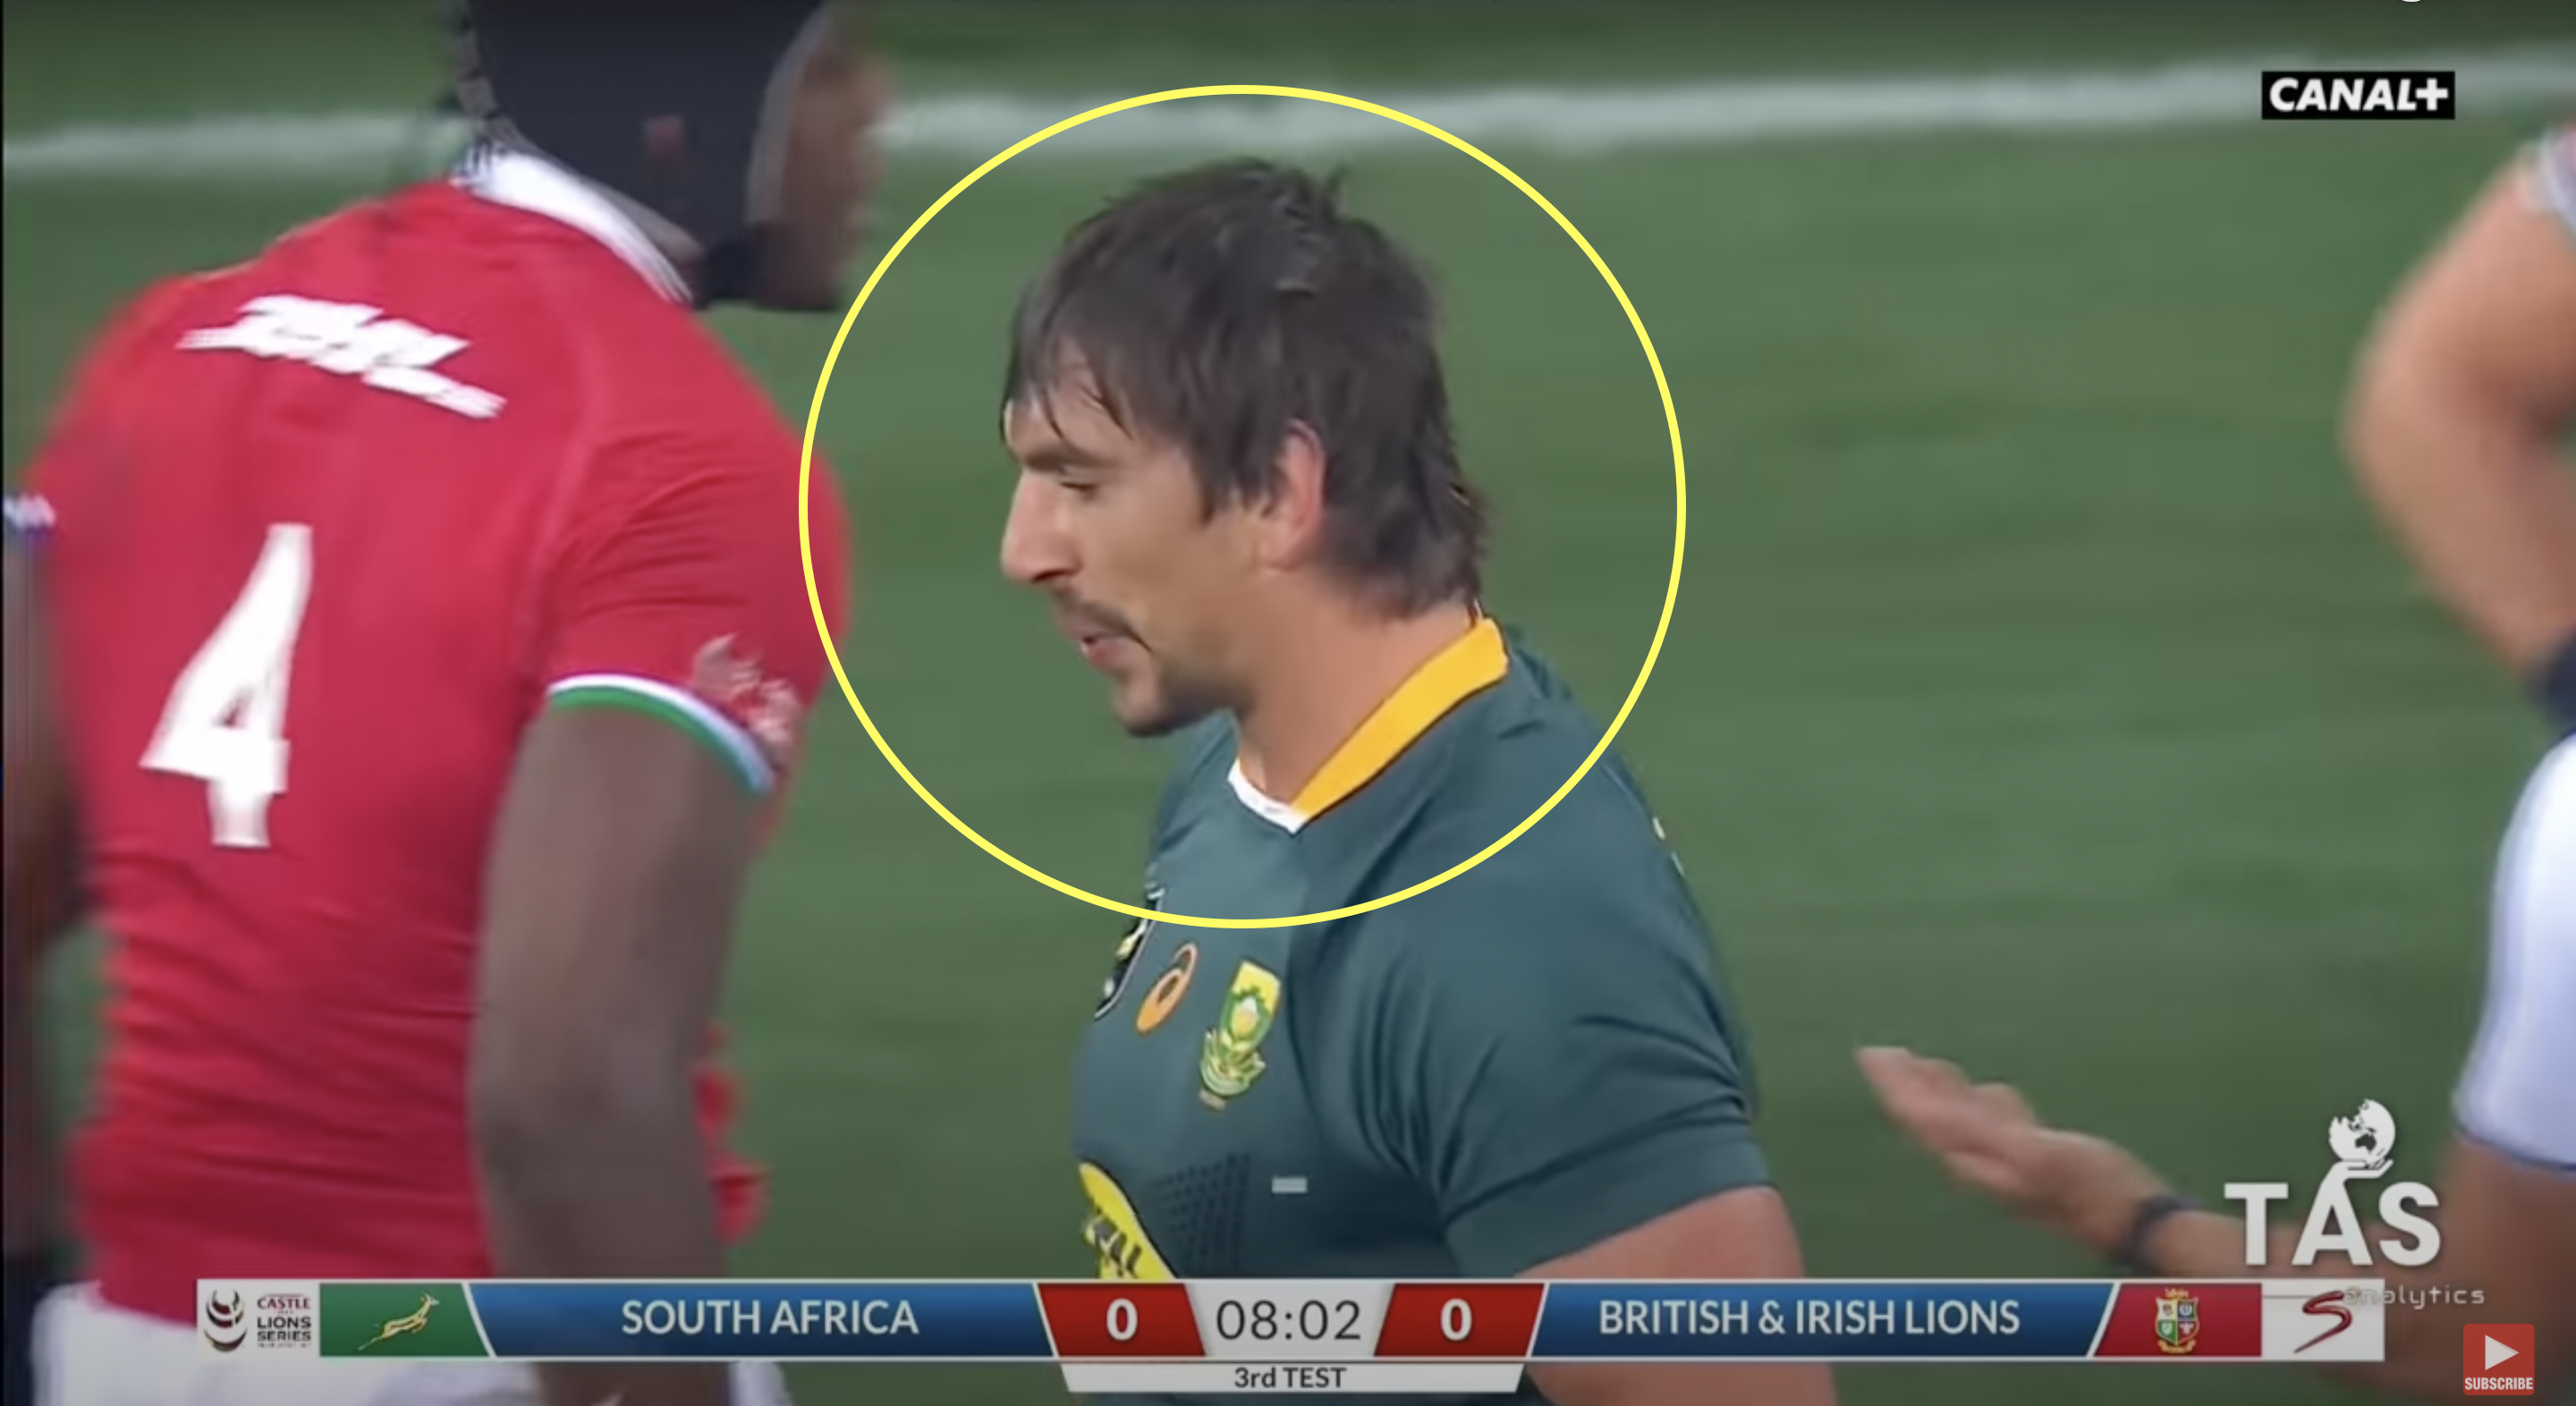 The ultimate proof that World Rugby actually has a problem with Eben Etzebeth